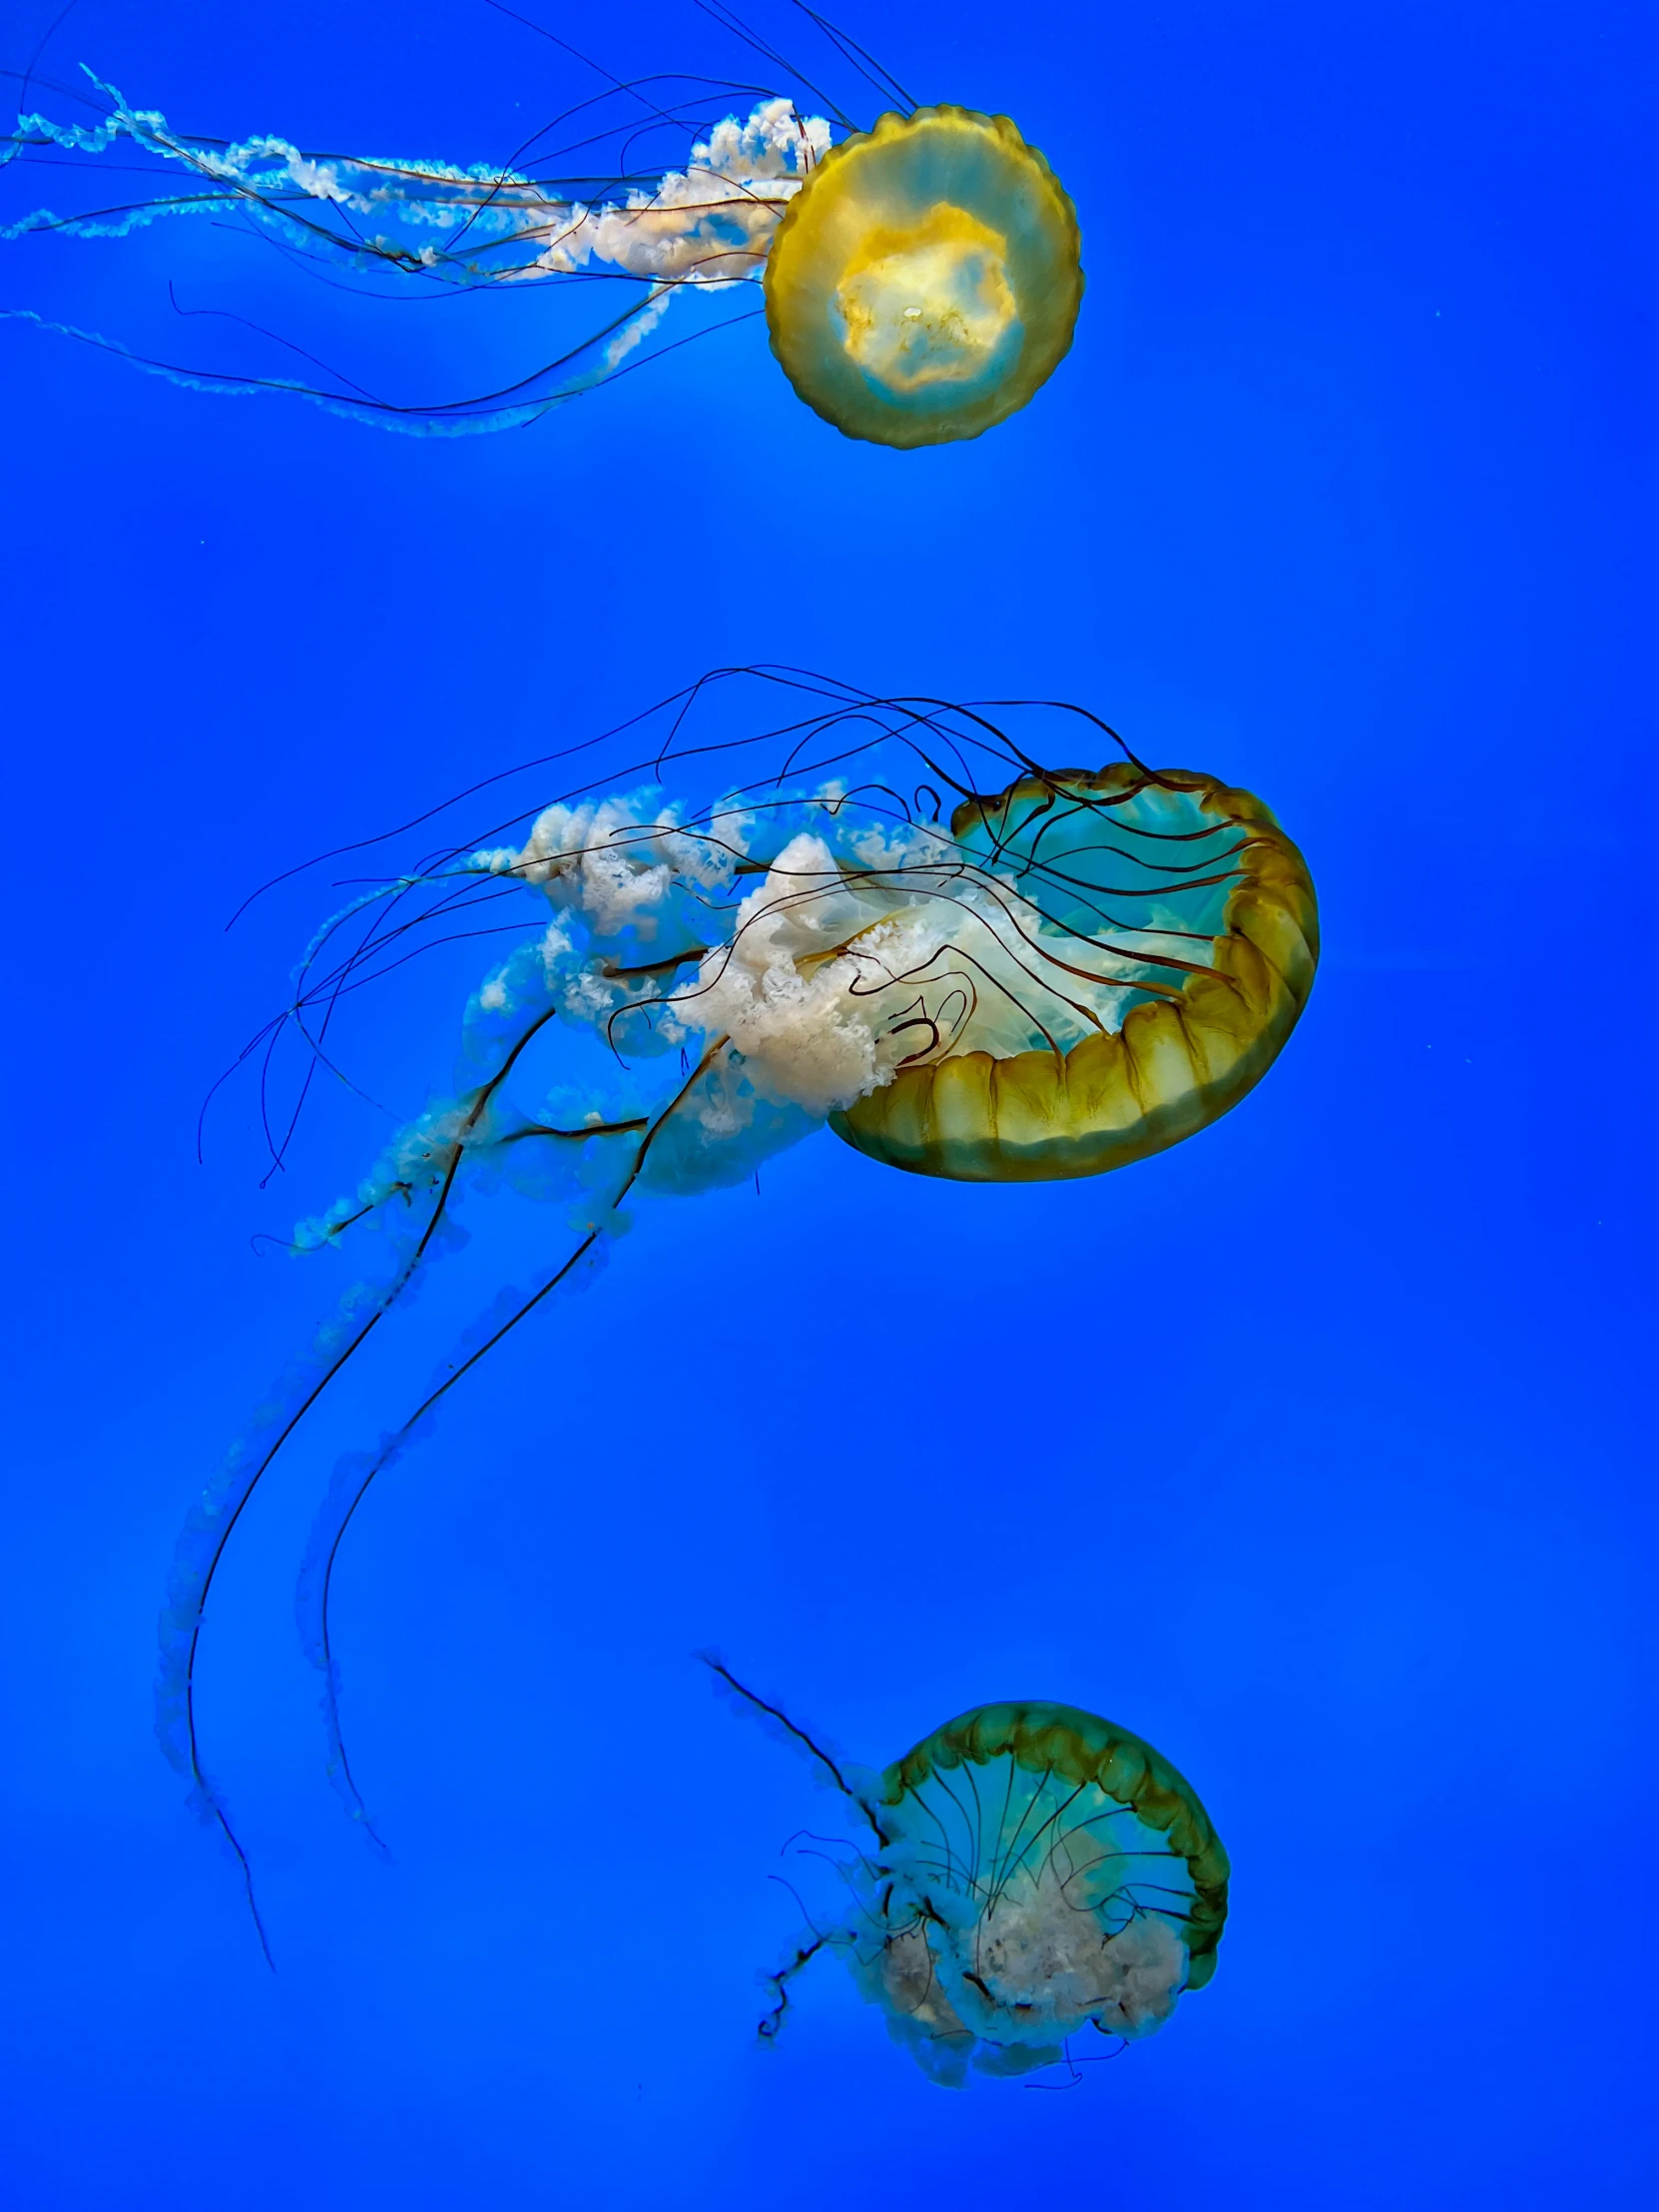 two jelly fish with bright blue tails swimming in the ocean